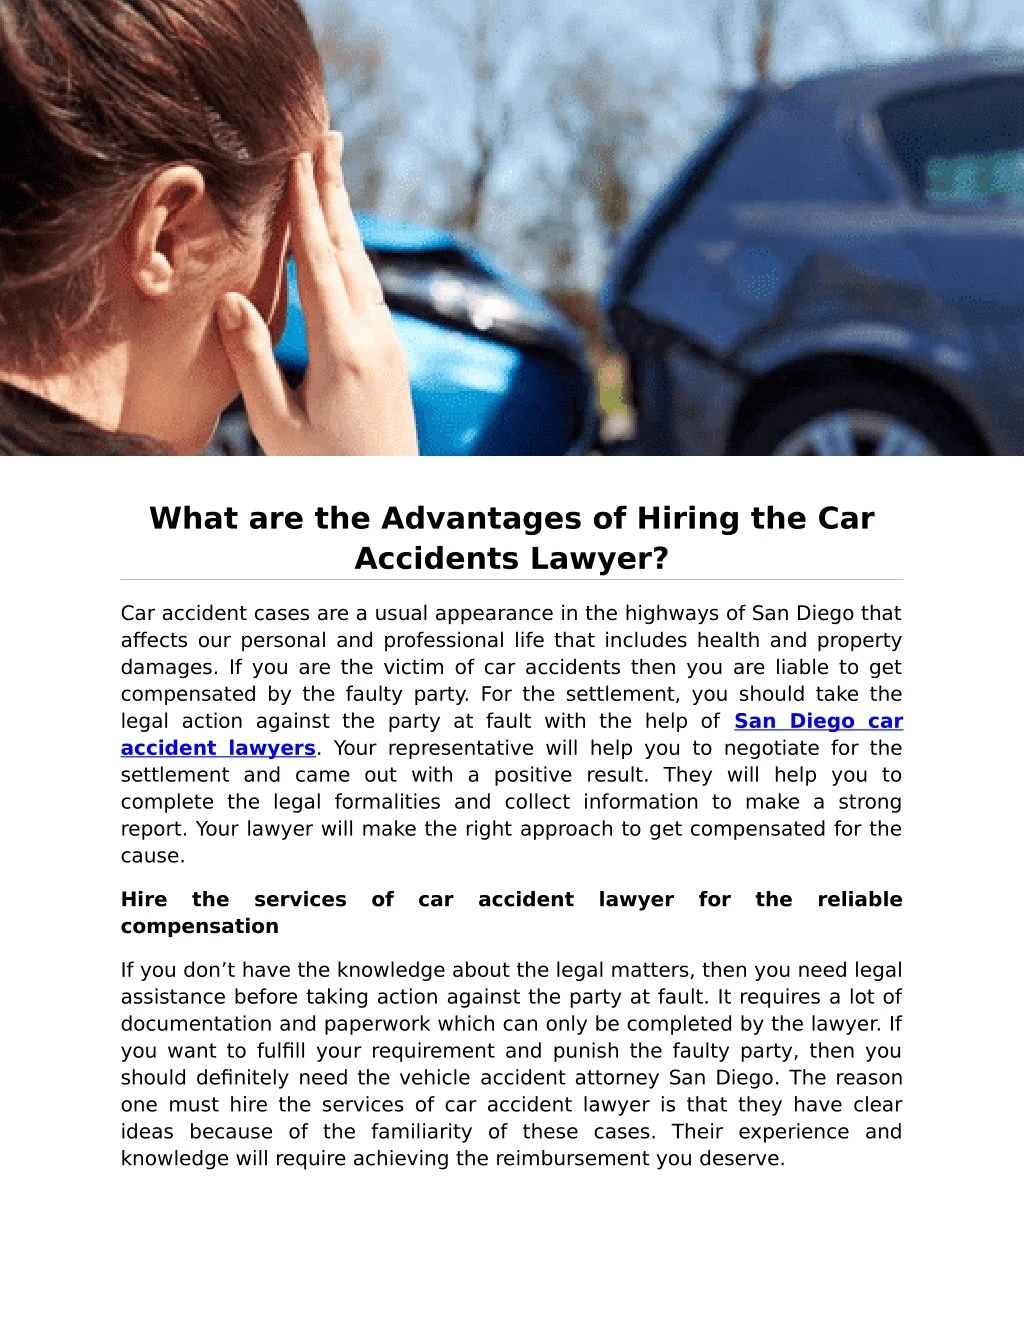 what are the advantages of hiring